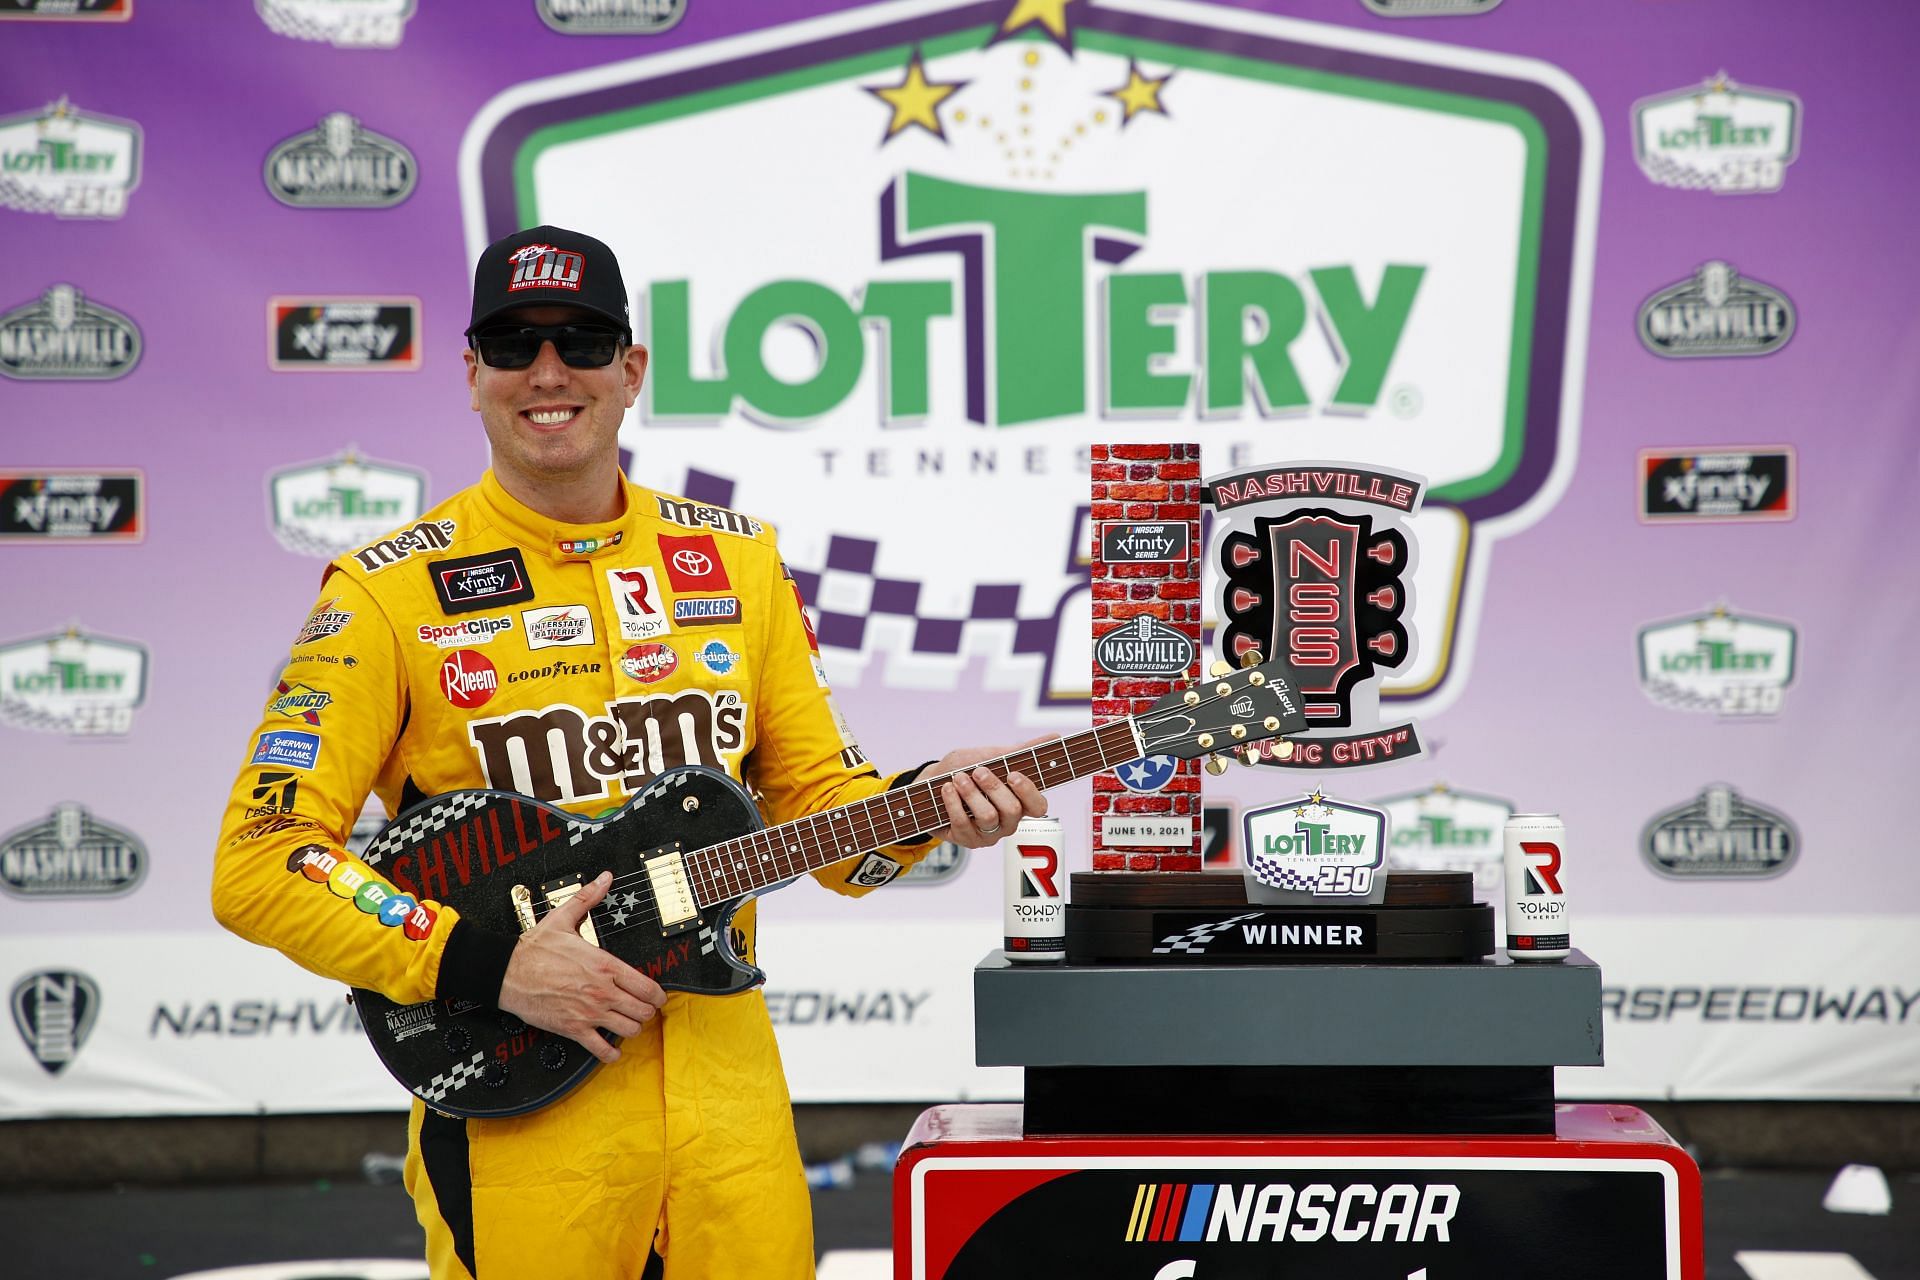 Kyle Busch celebrates in victory lane after winning the 2021 NASCAR Xfinity Series at Nashville Superspeedway.